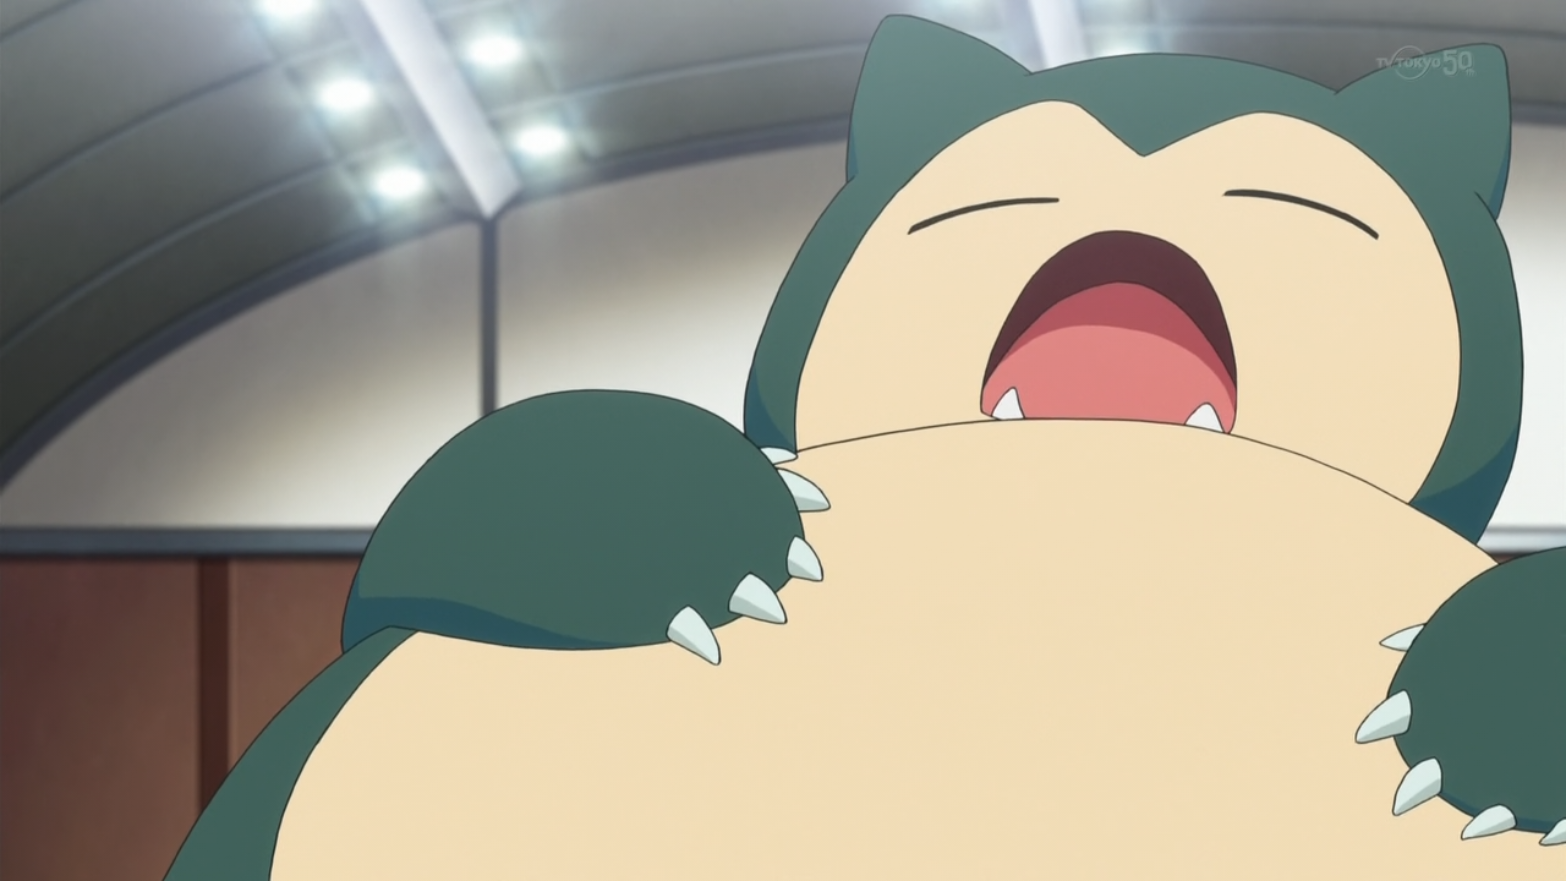 Pokemon unveils new weekly anime series with Snorlax short - Dexerto